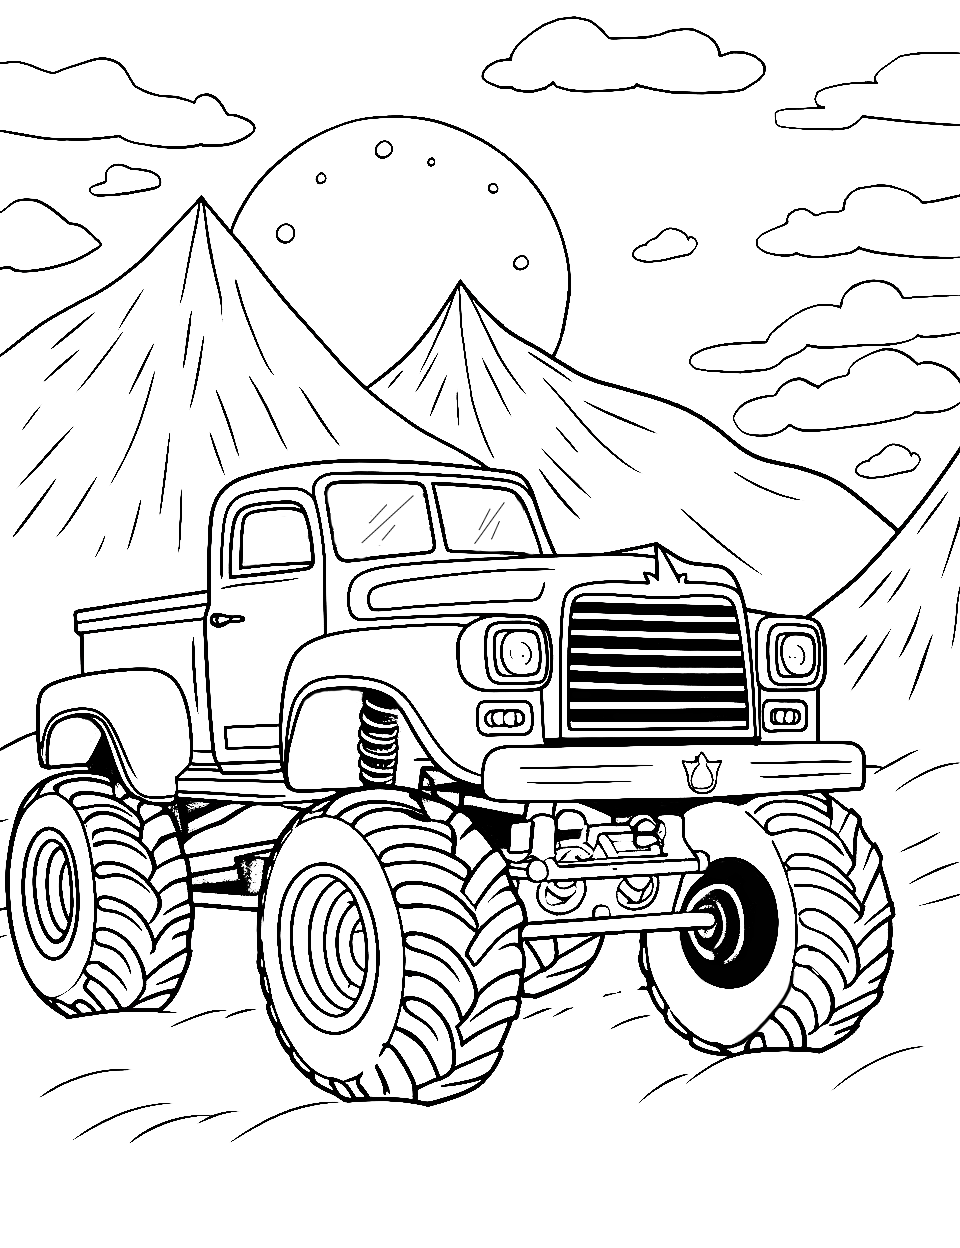 Moonlight Monster Truck Coloring Page - A monster truck under a glowing moon.